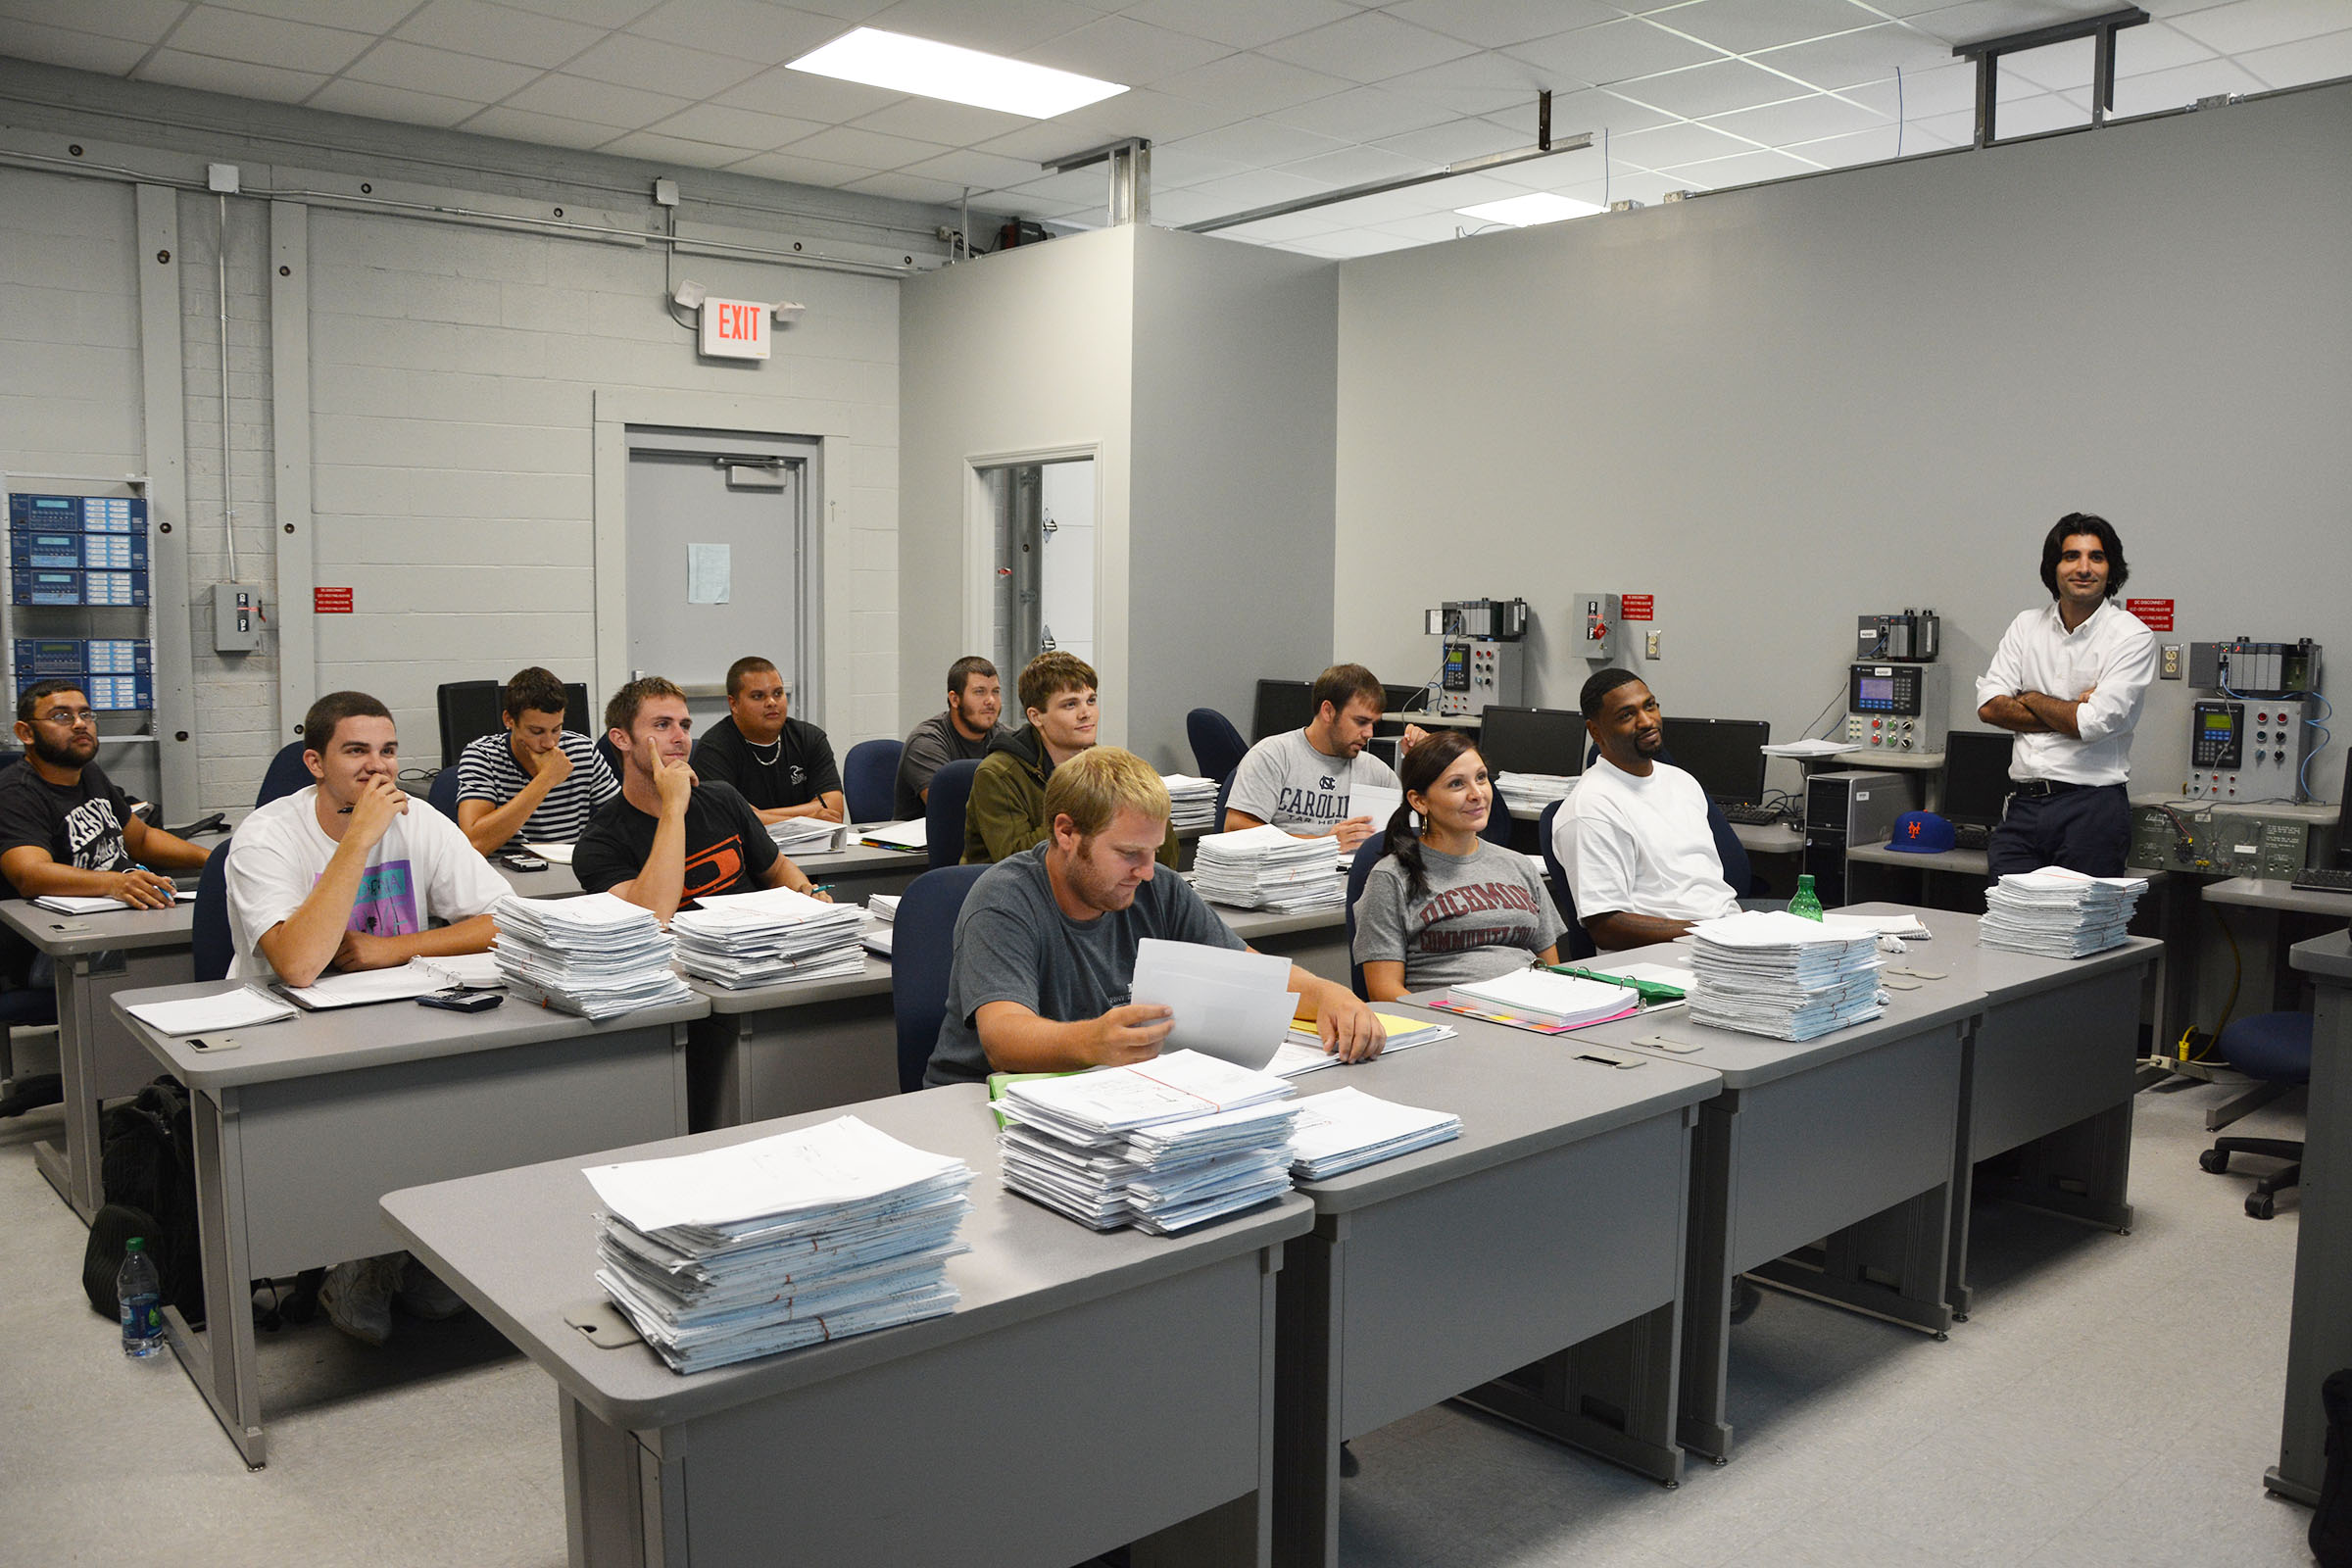 Electric Utility Substation and Relay Technology (EUSRT) instructor Morteza Talebi stands in a classroom with students sitting at desks with books and papers in front of them.